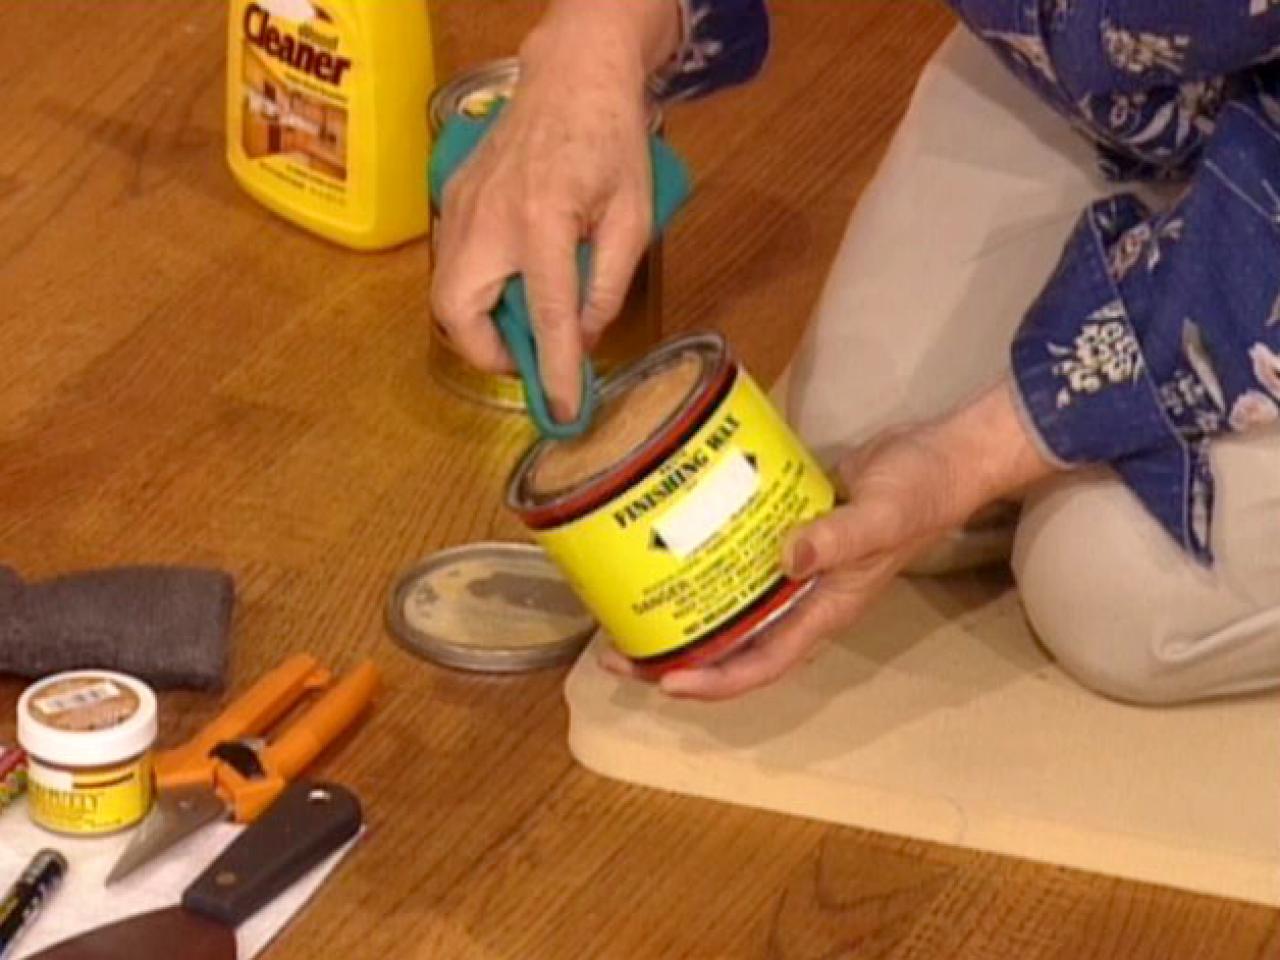 How To Touch Up Wood Floors Tos Diy, Can You Put Wax On Hardwood Floors